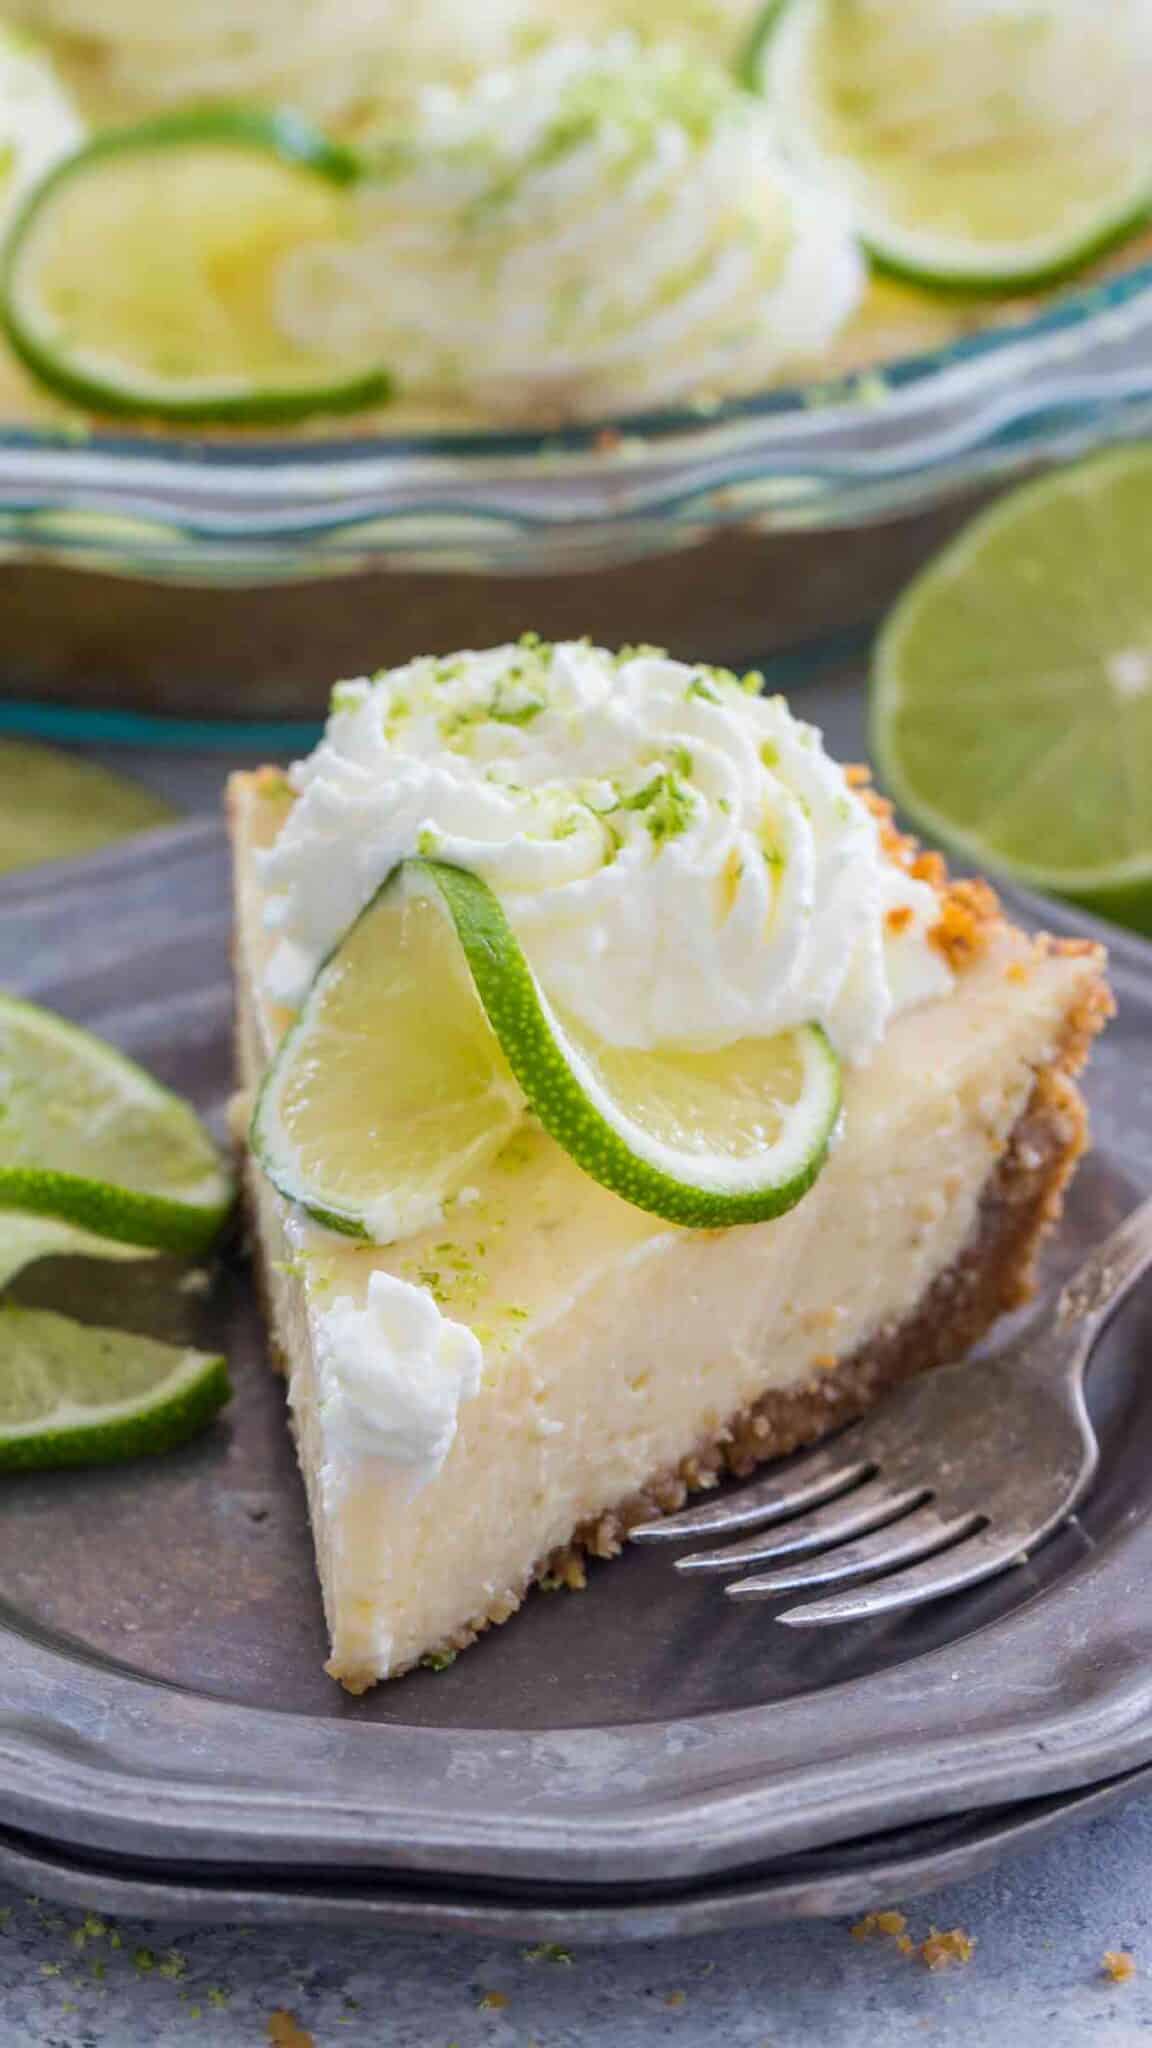 Homemade Key Lime Pie Recipe [VIDEO] - Sweet and Savory Meals